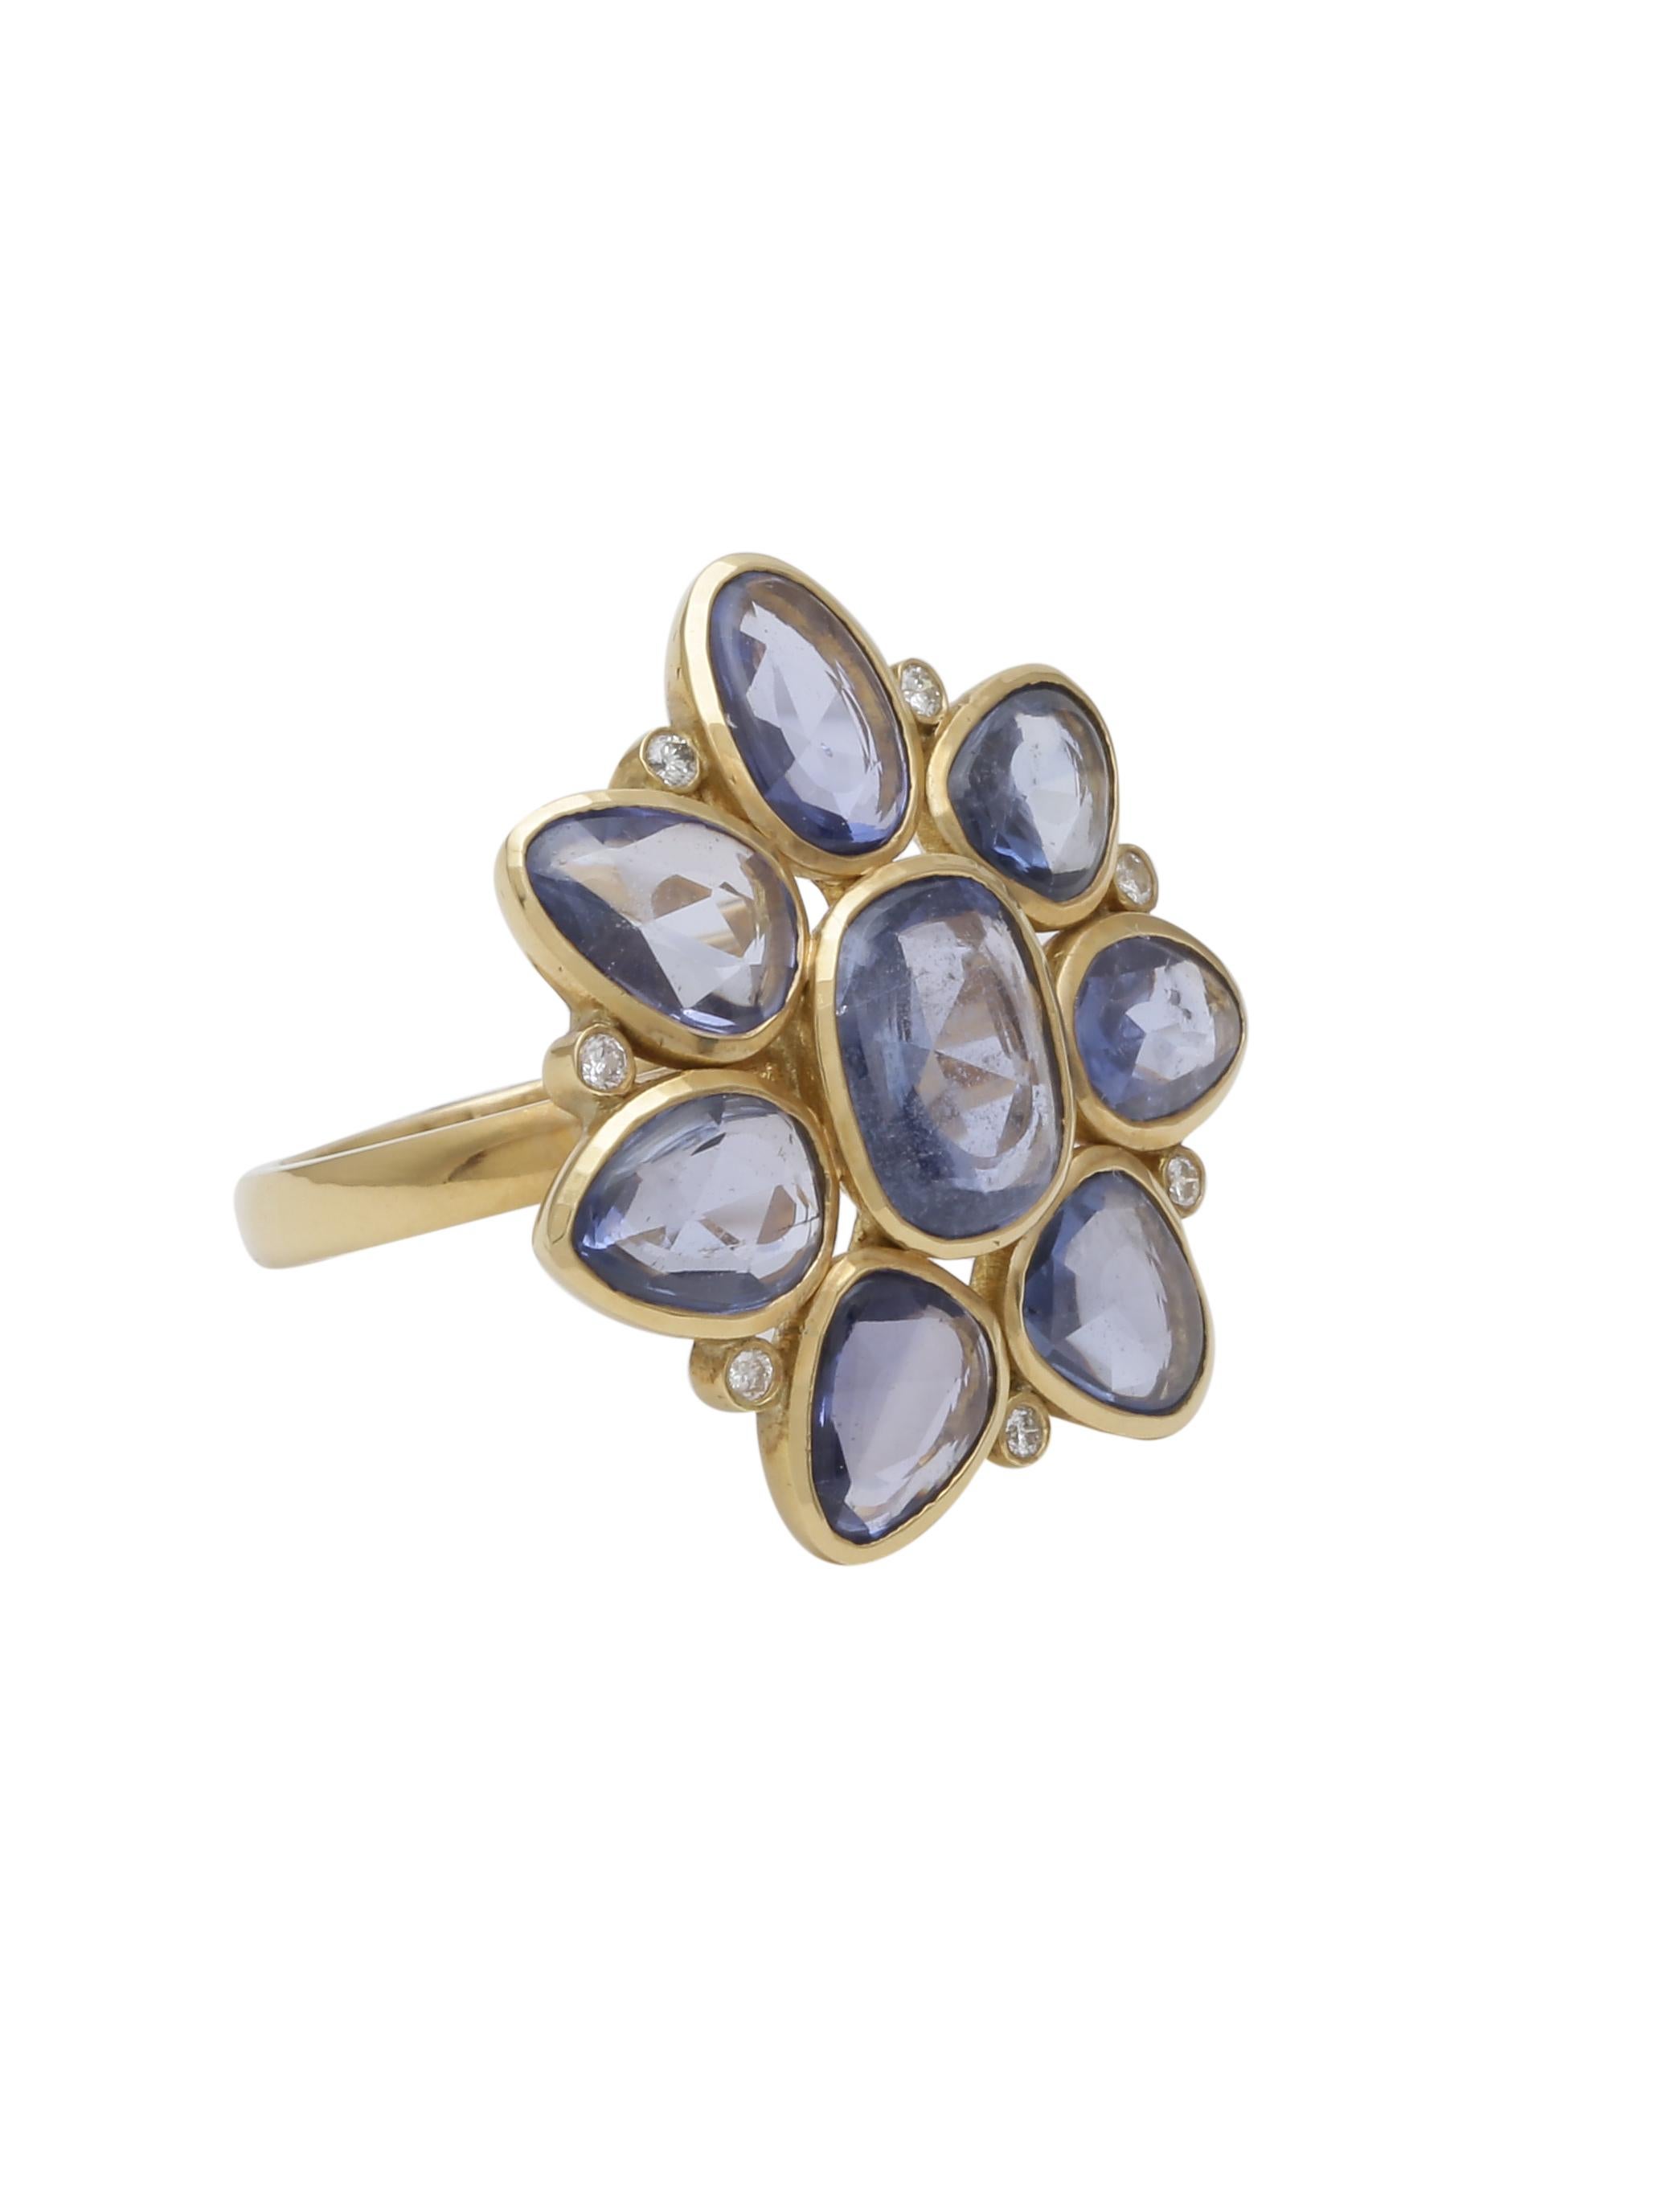 Modern Sapphire Rosecut and Diamond Flower Motif Ring Handcrafted in 18 Karat Gold For Sale